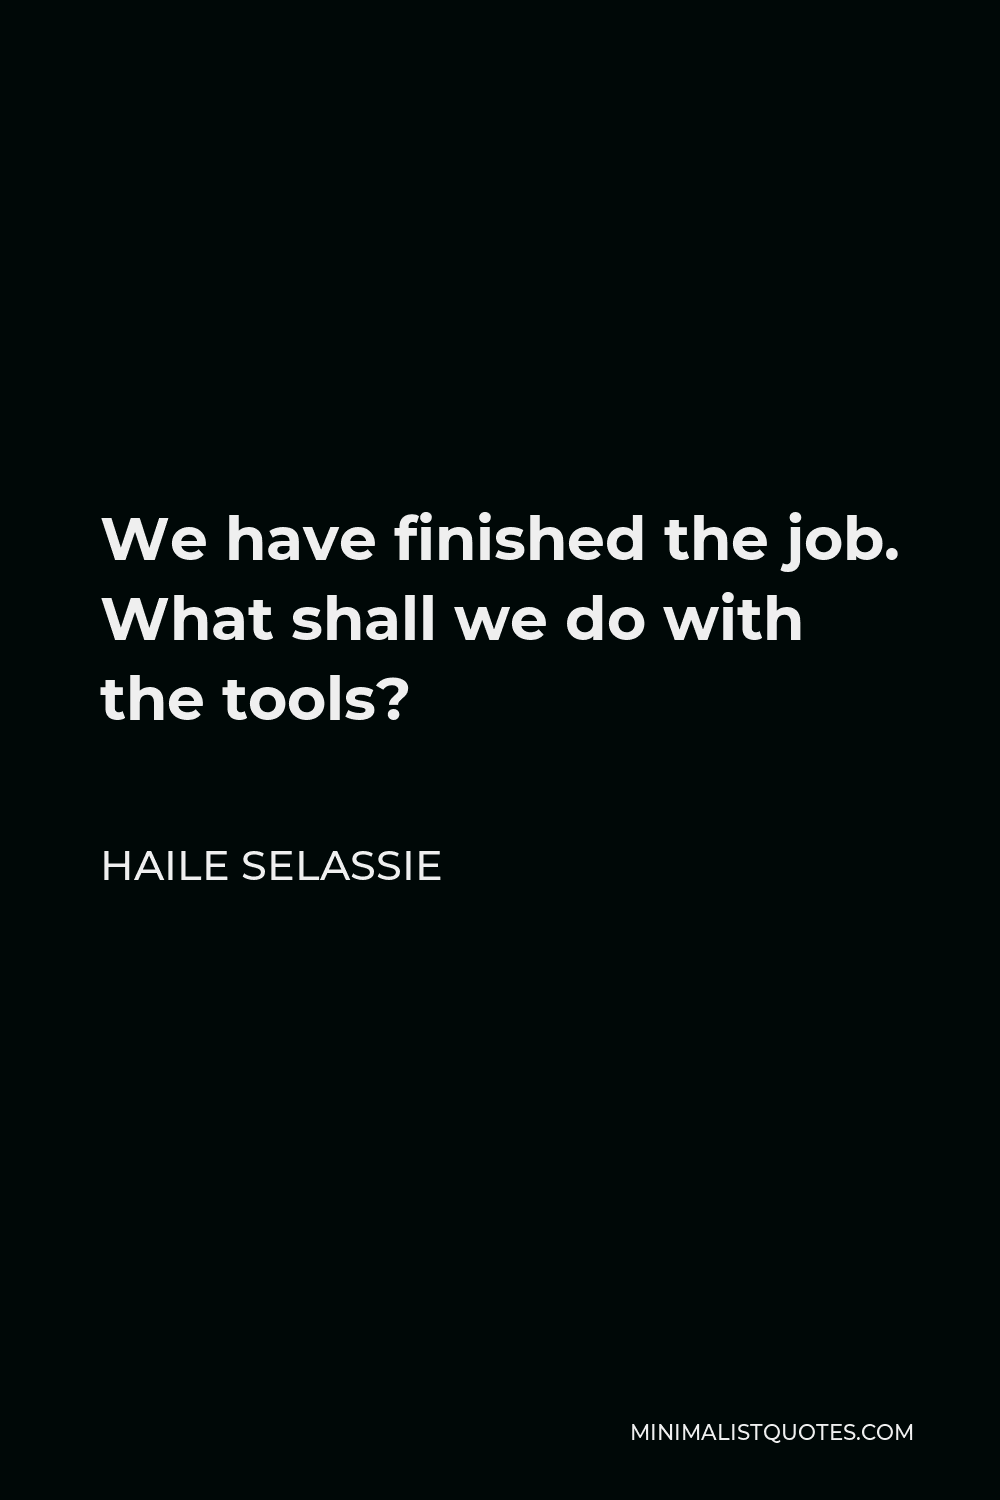 Haile Selassie Quote - We have finished the job. What shall we do with the tools?